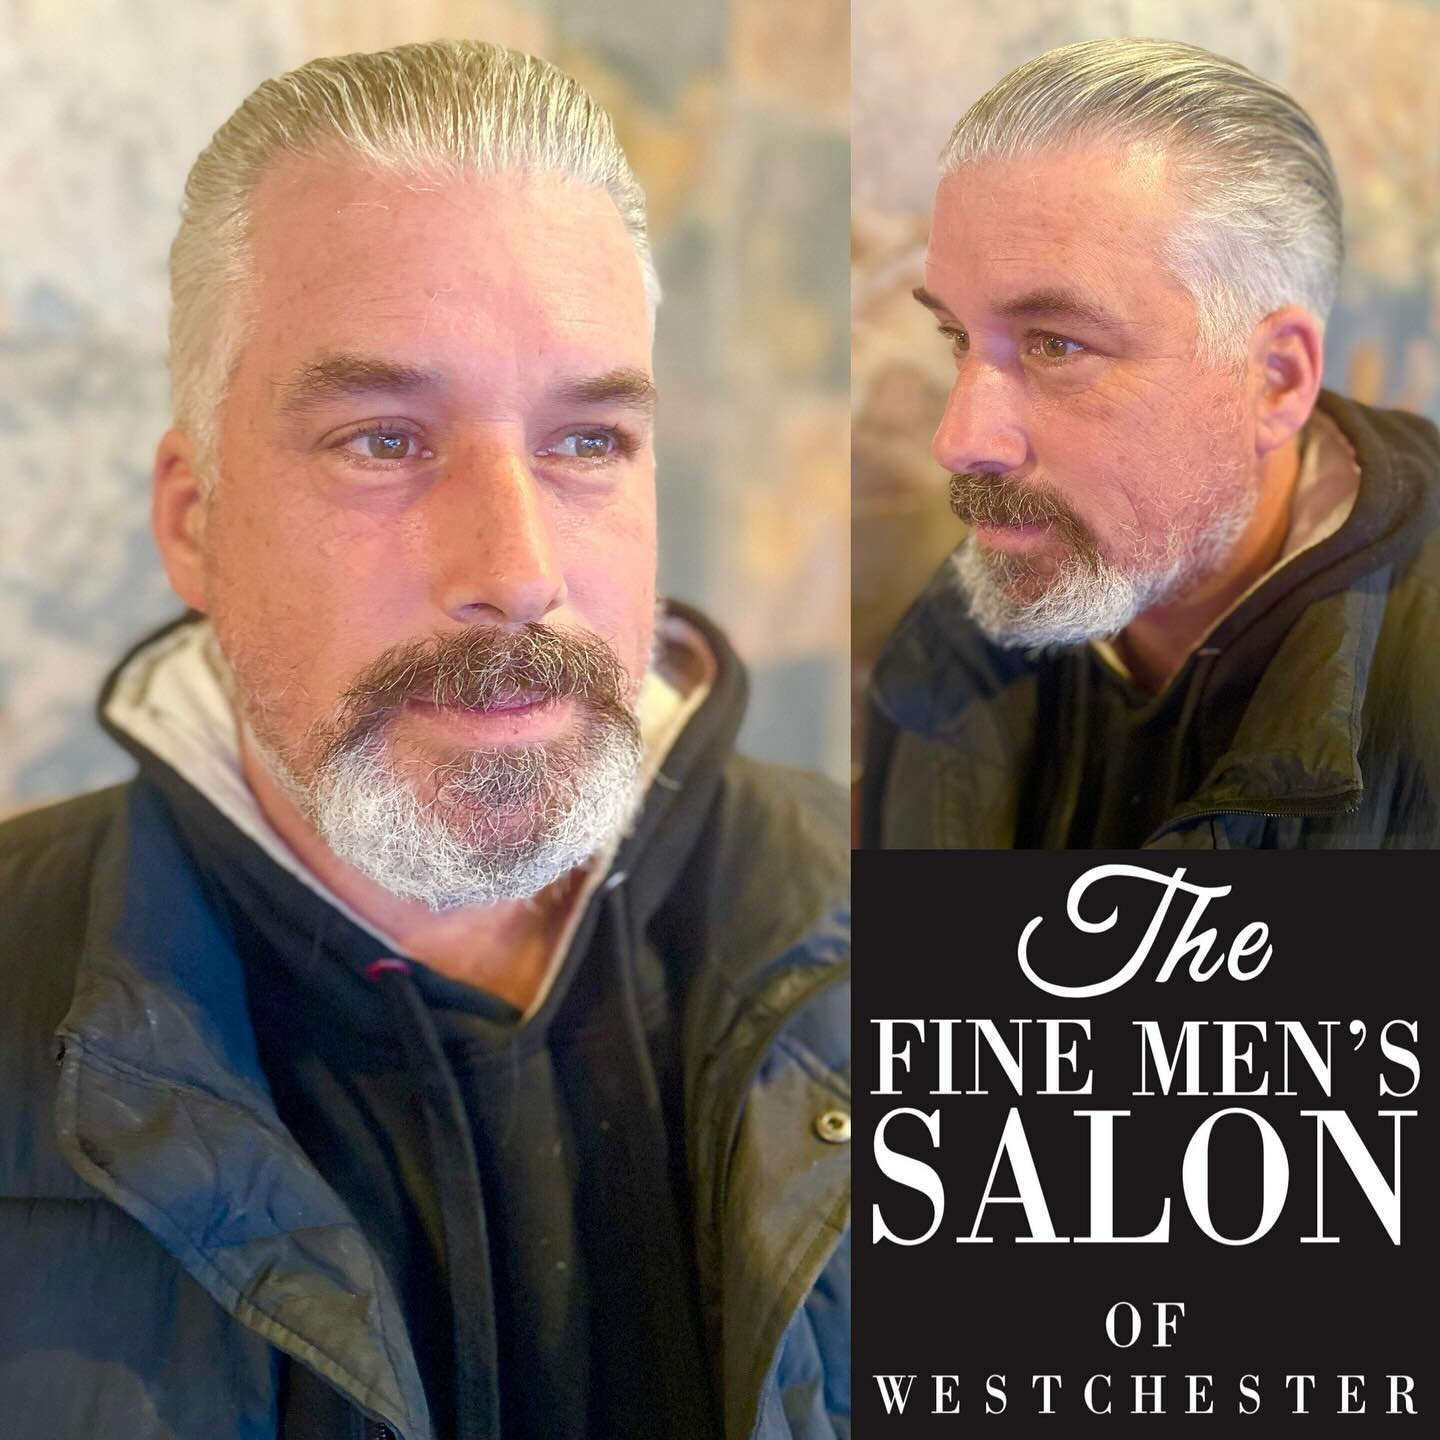 A Well Groomed Gentleman, is the Epitome of Class and Sophistication. Stay Handsome 💪
✨Haircut | Style by Neli
✨Call 914-412-7755
✨Online Reservations Available at Link in Bio or at thefinemenssalon.com
✨Walk In! 
✨
#handsomegentlemen #menwhogroom #